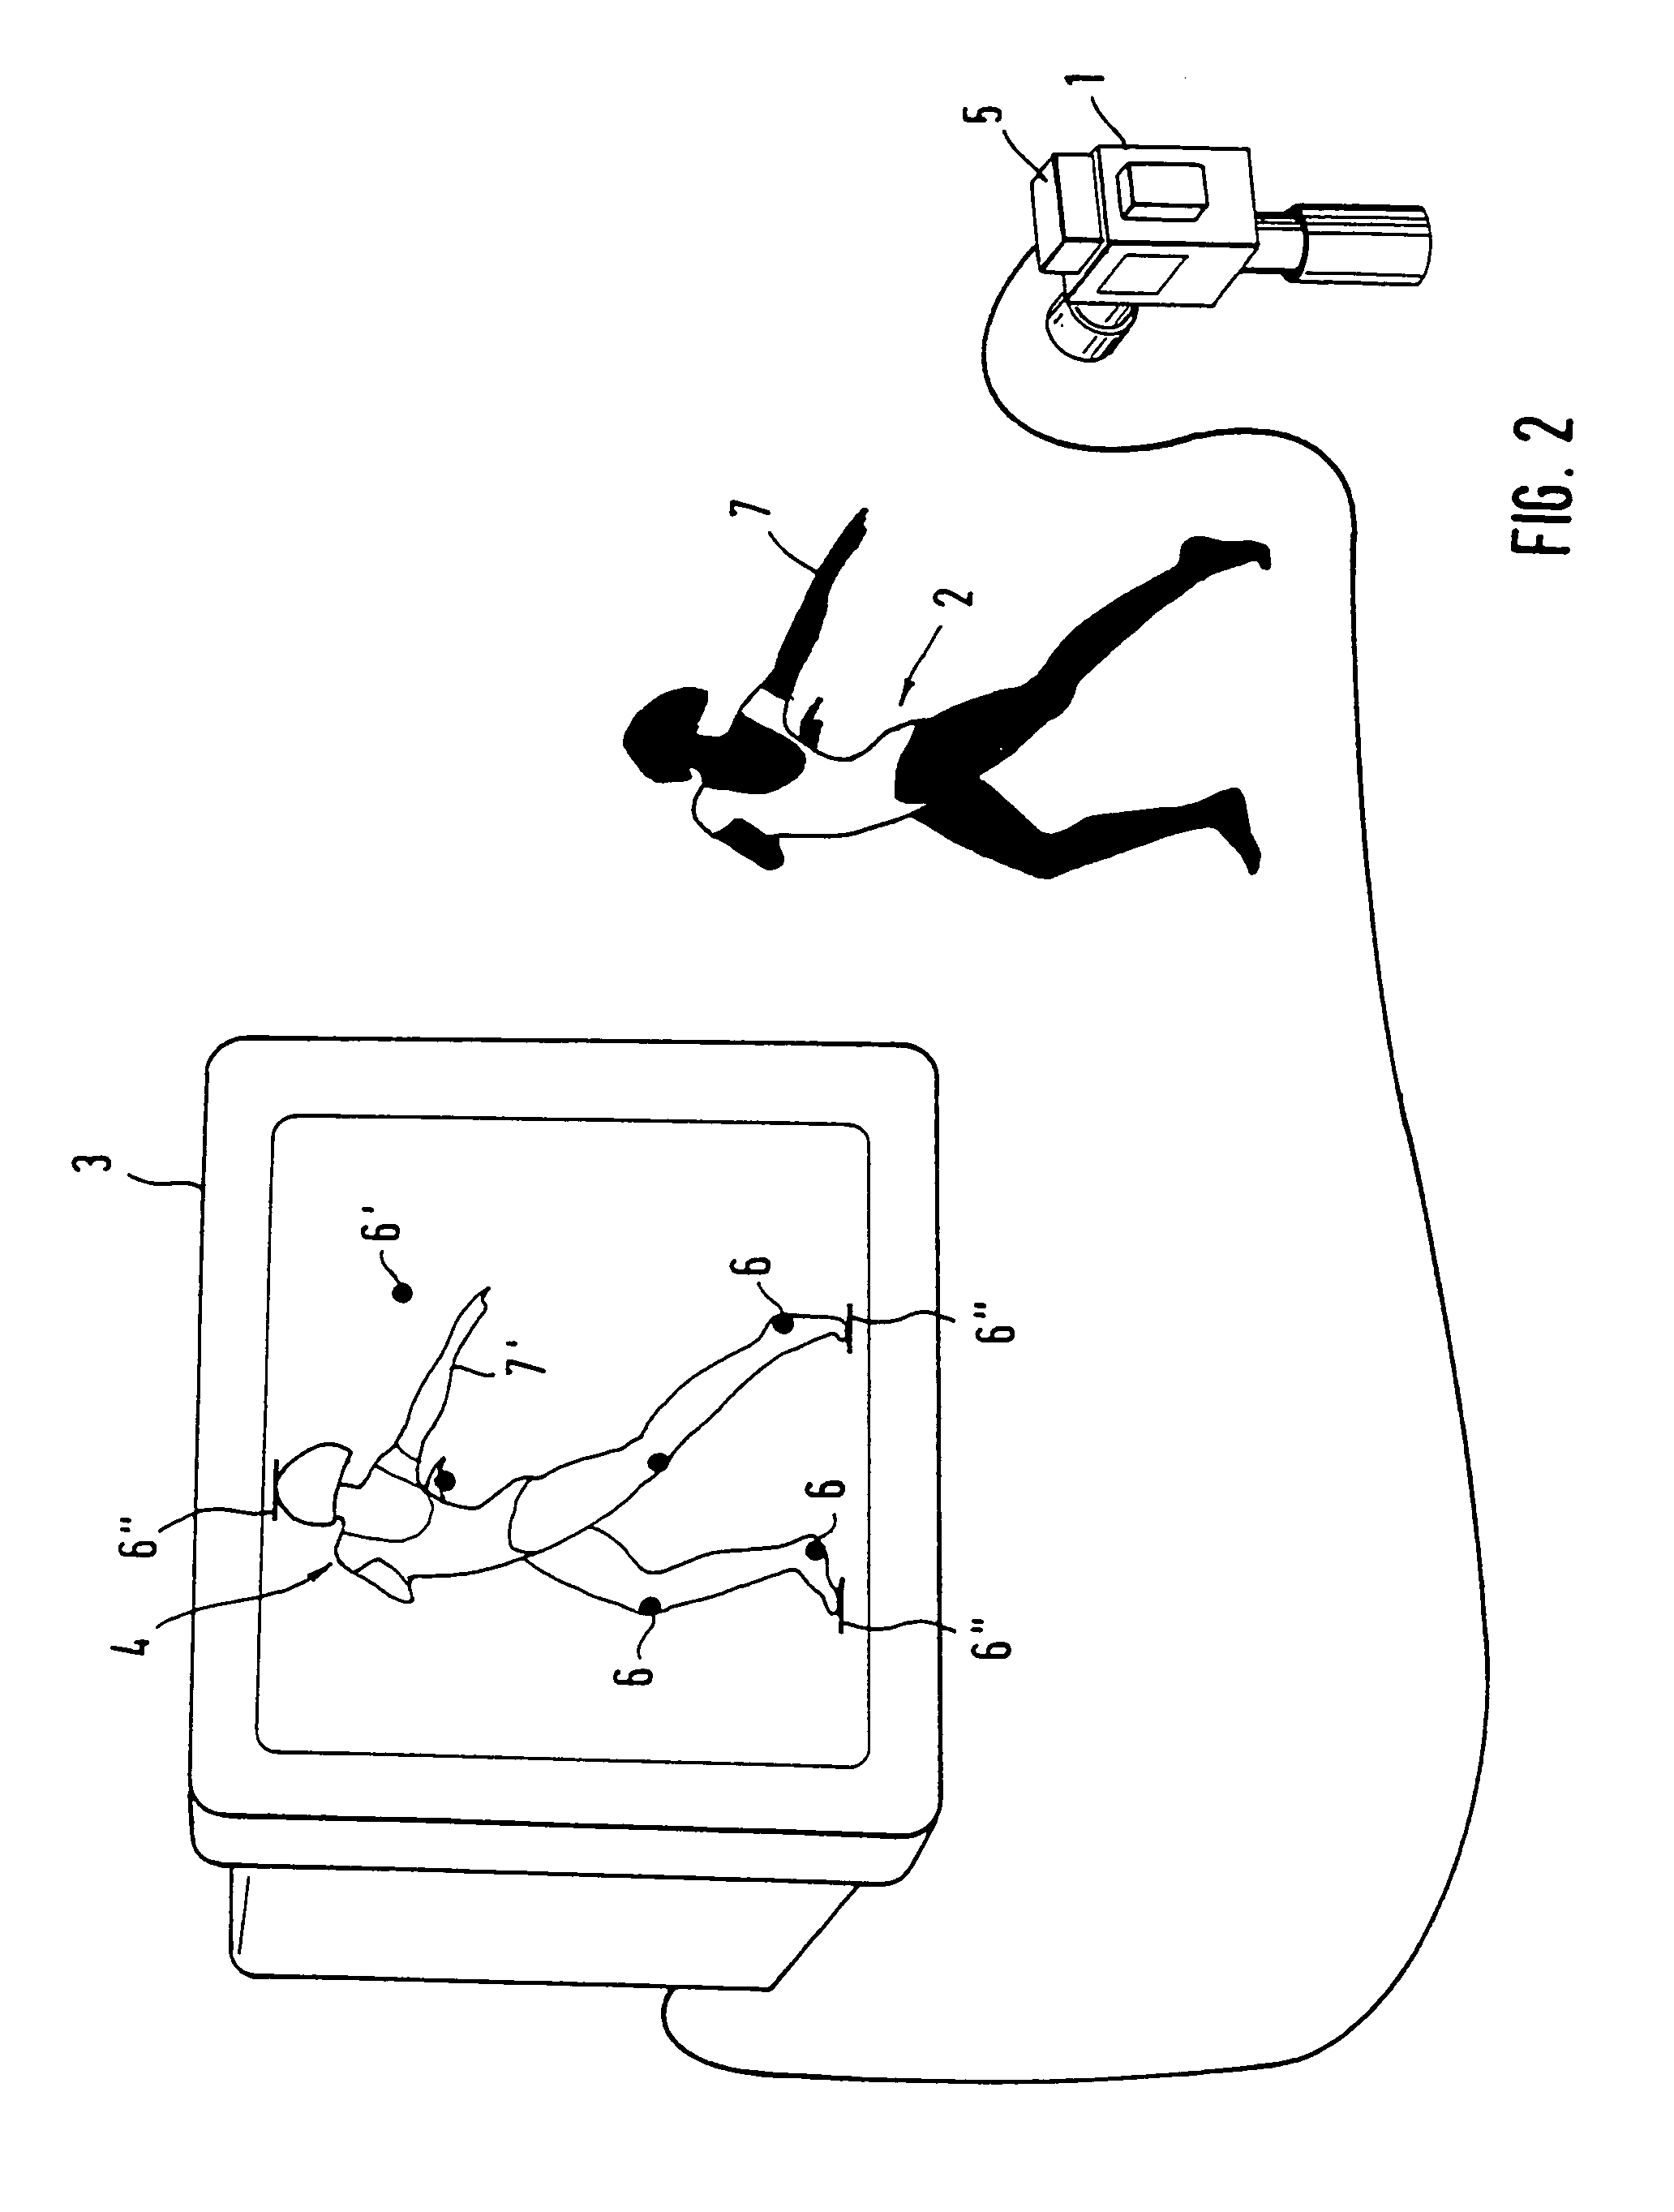 System for enabling a moving person to control body movements to be performed by said person